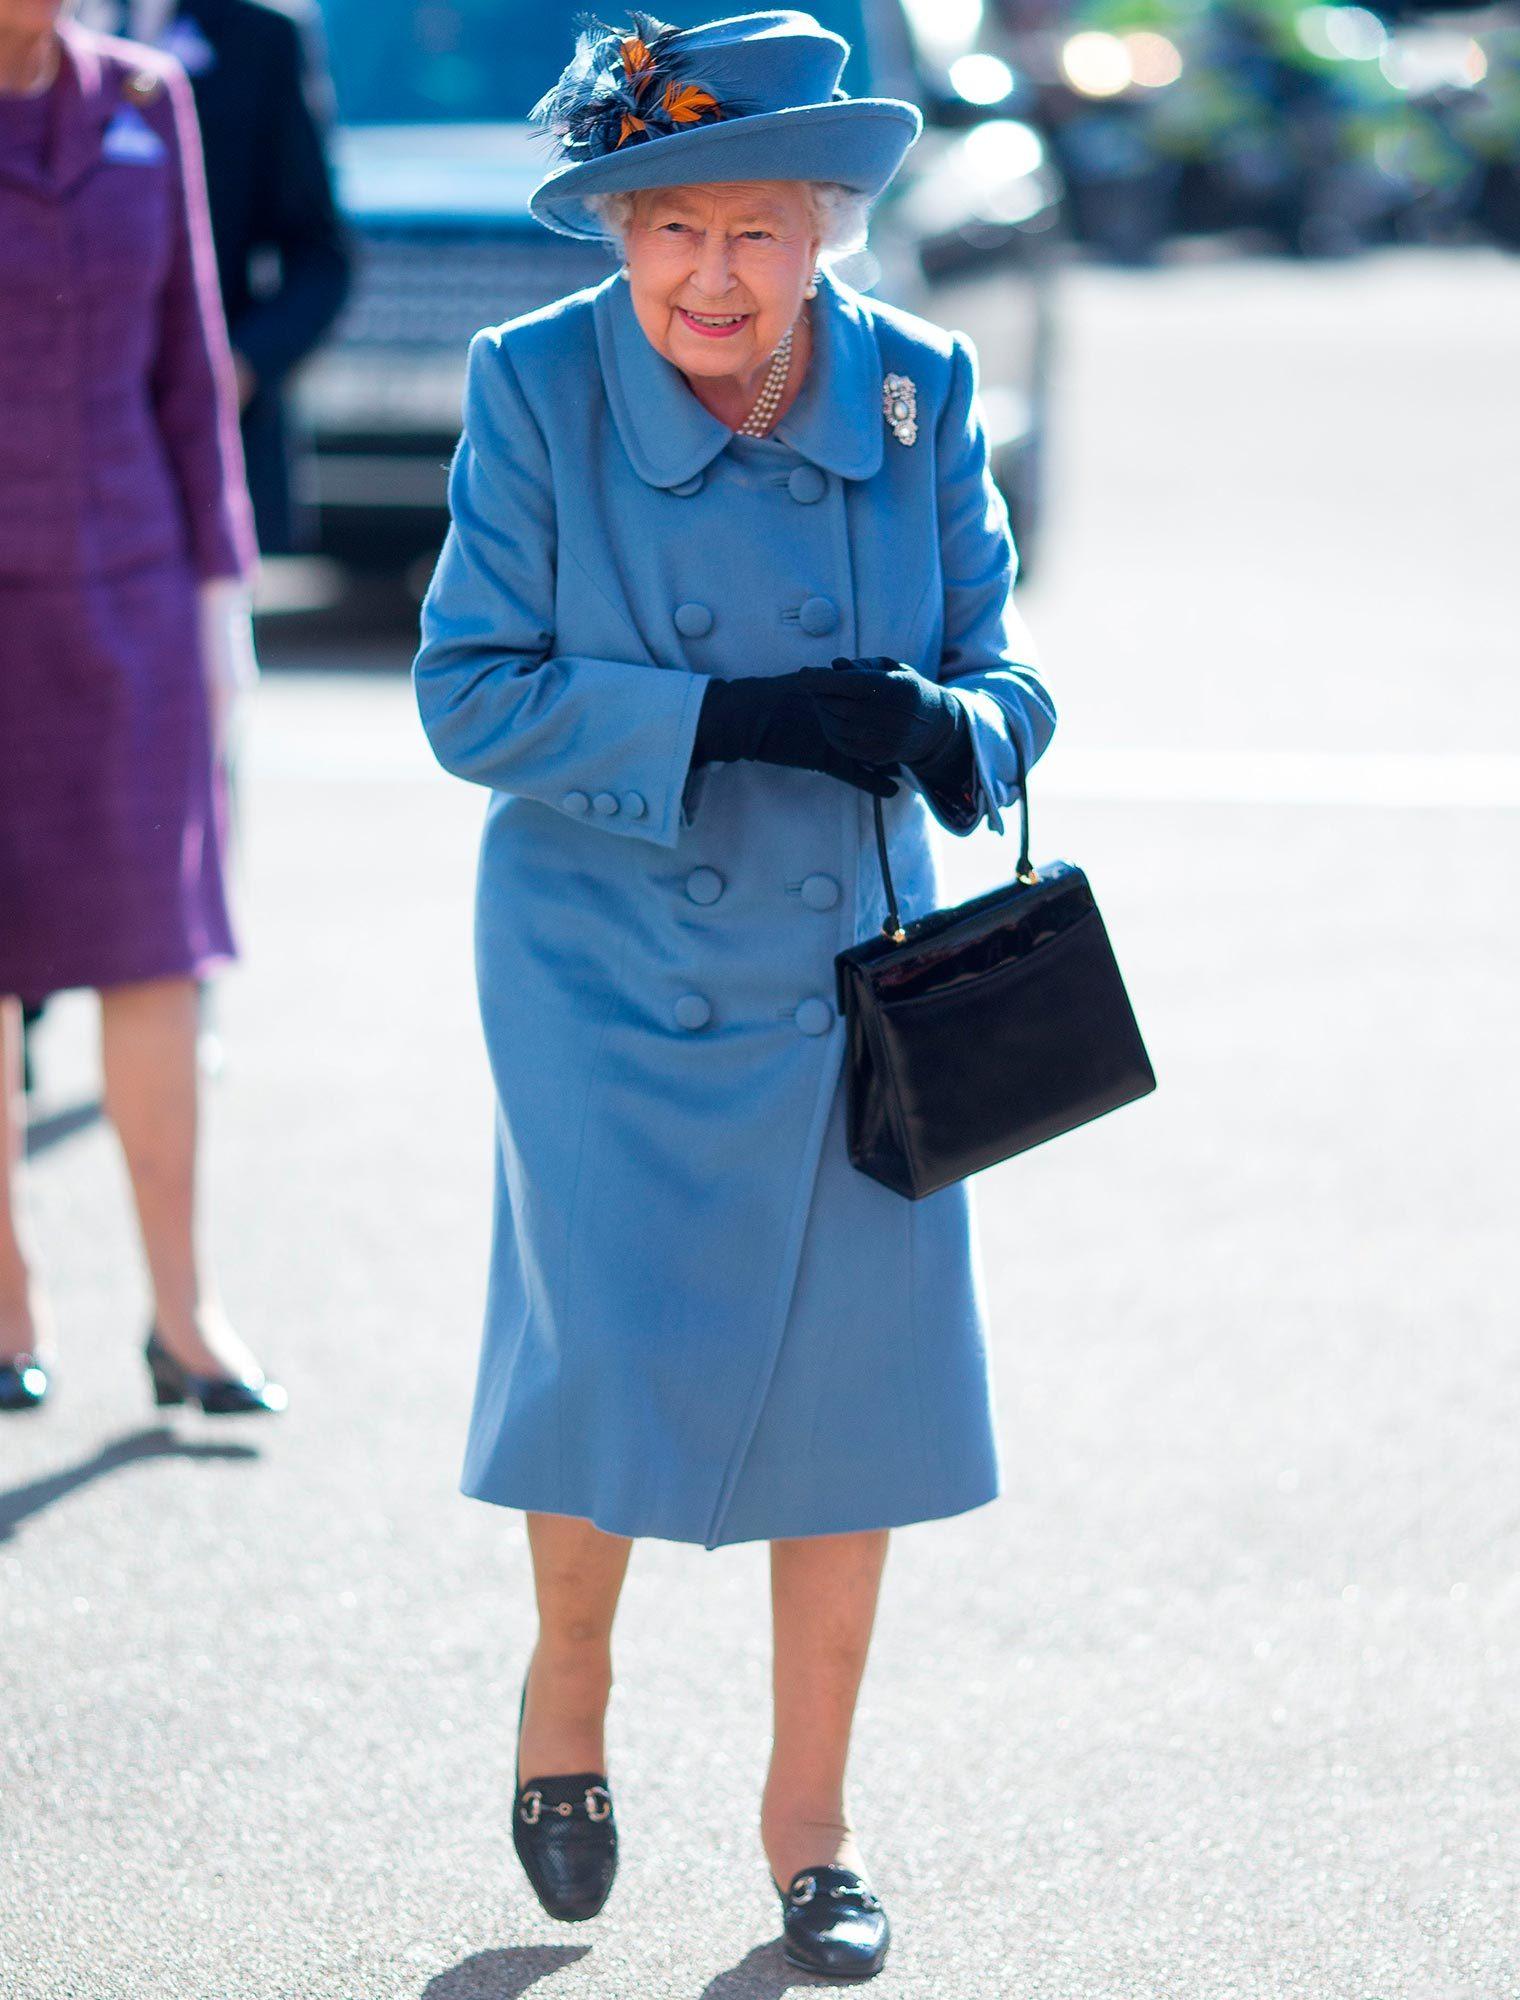 27 Fascinating Facts About Queen Elizabeth II | Reader's Digest Canada